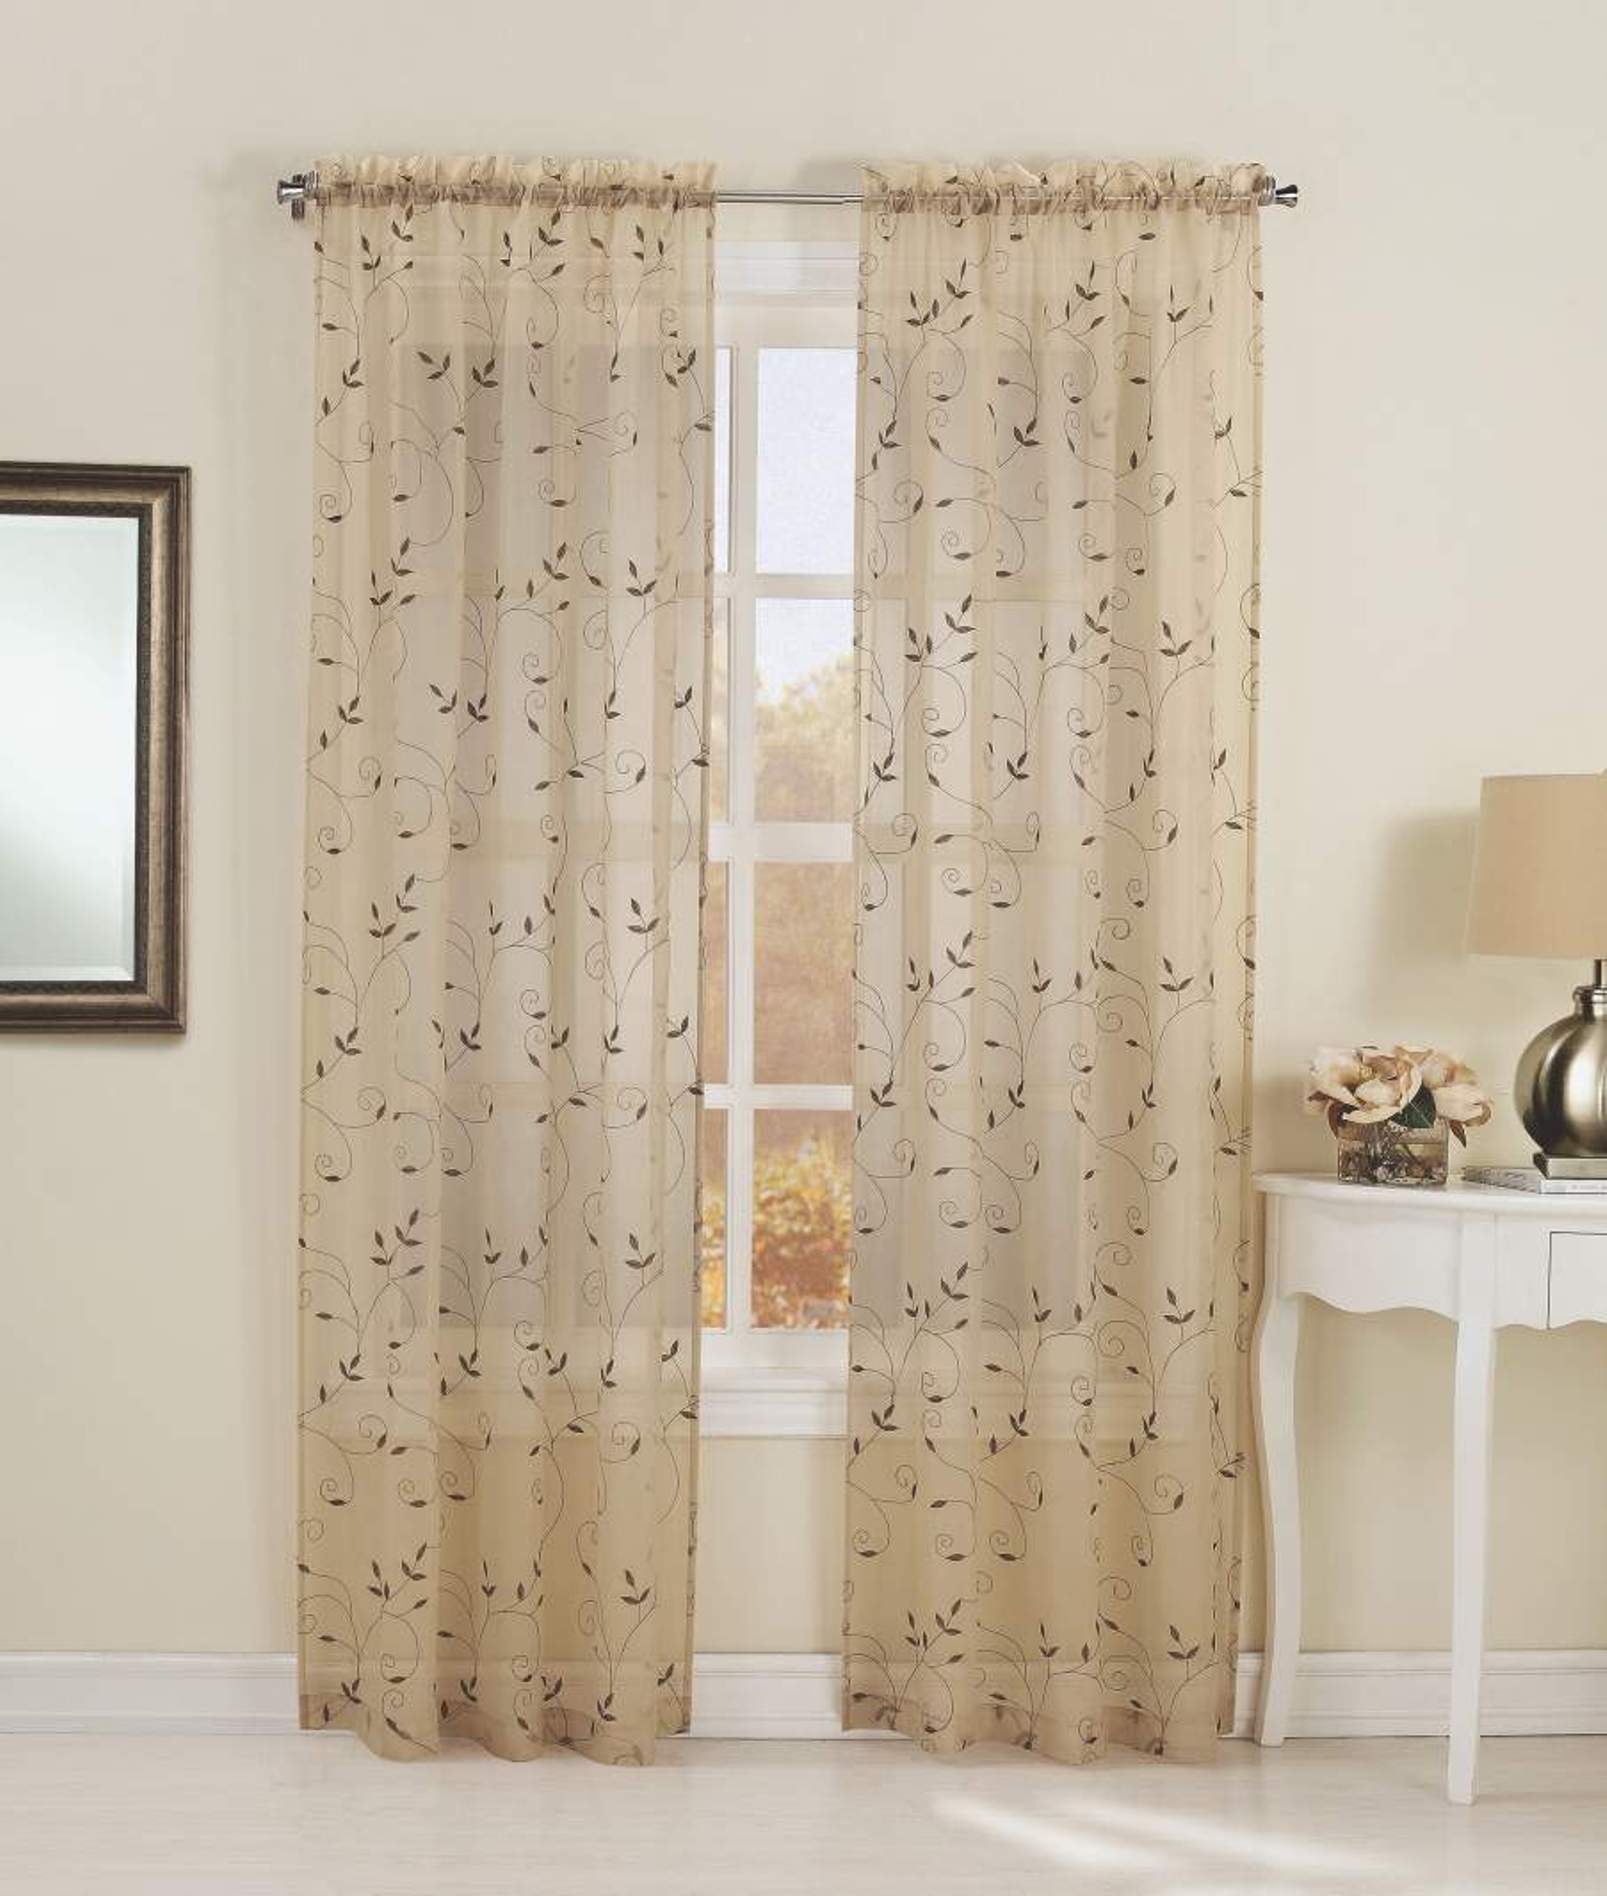 Essential Home Alex Embroidered Sheer Voile Window Panel   Home   Home